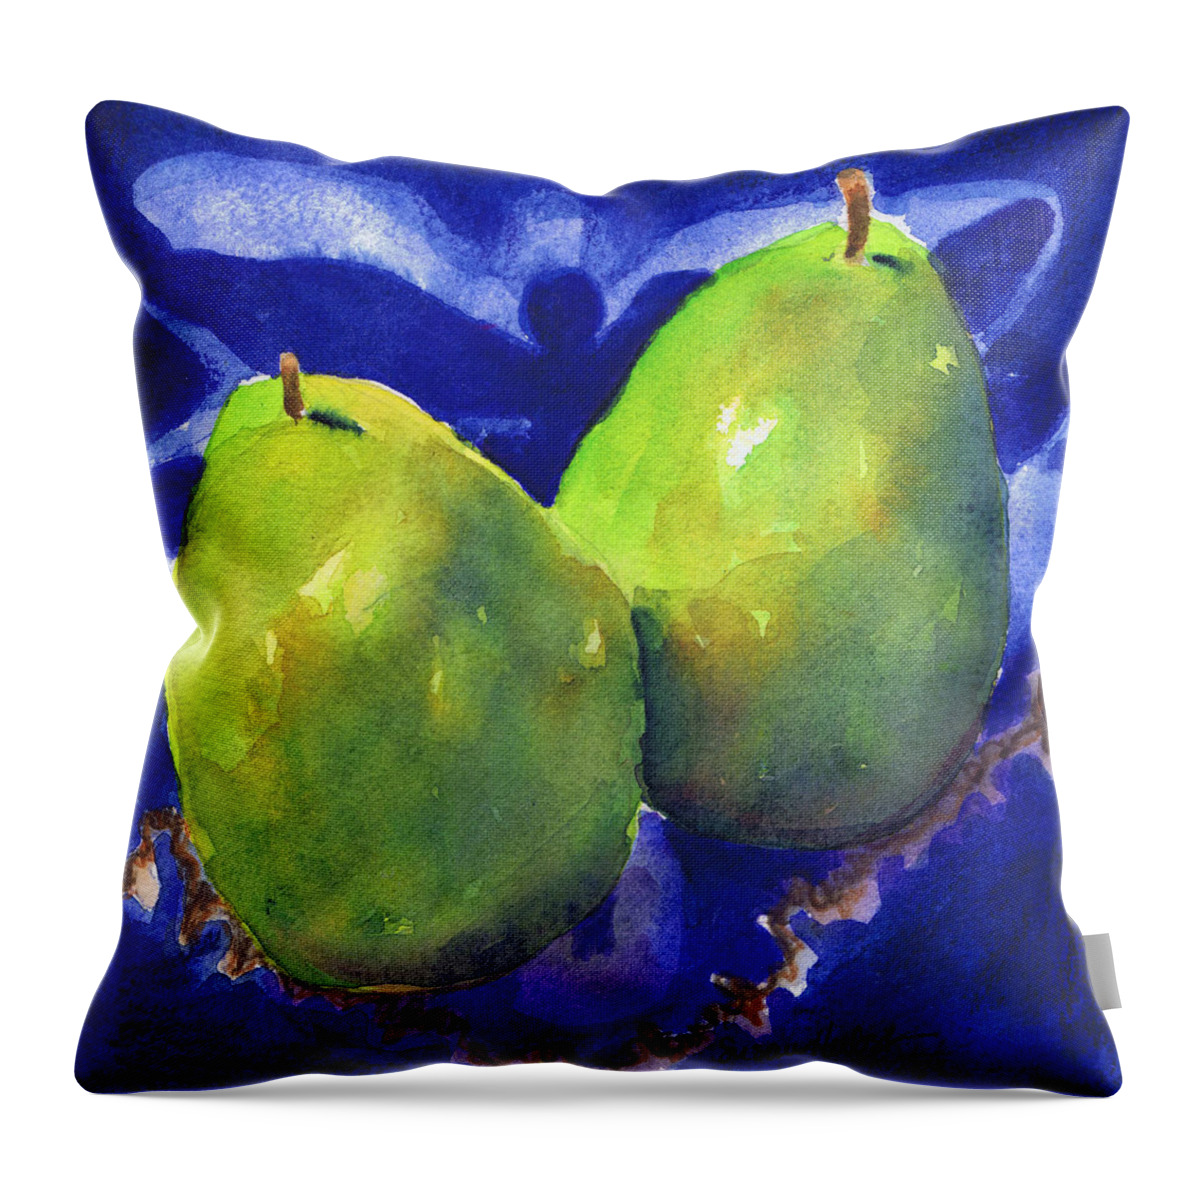 Pears Throw Pillow featuring the painting Two Pears on Blue Tile #1 by Susan Herbst